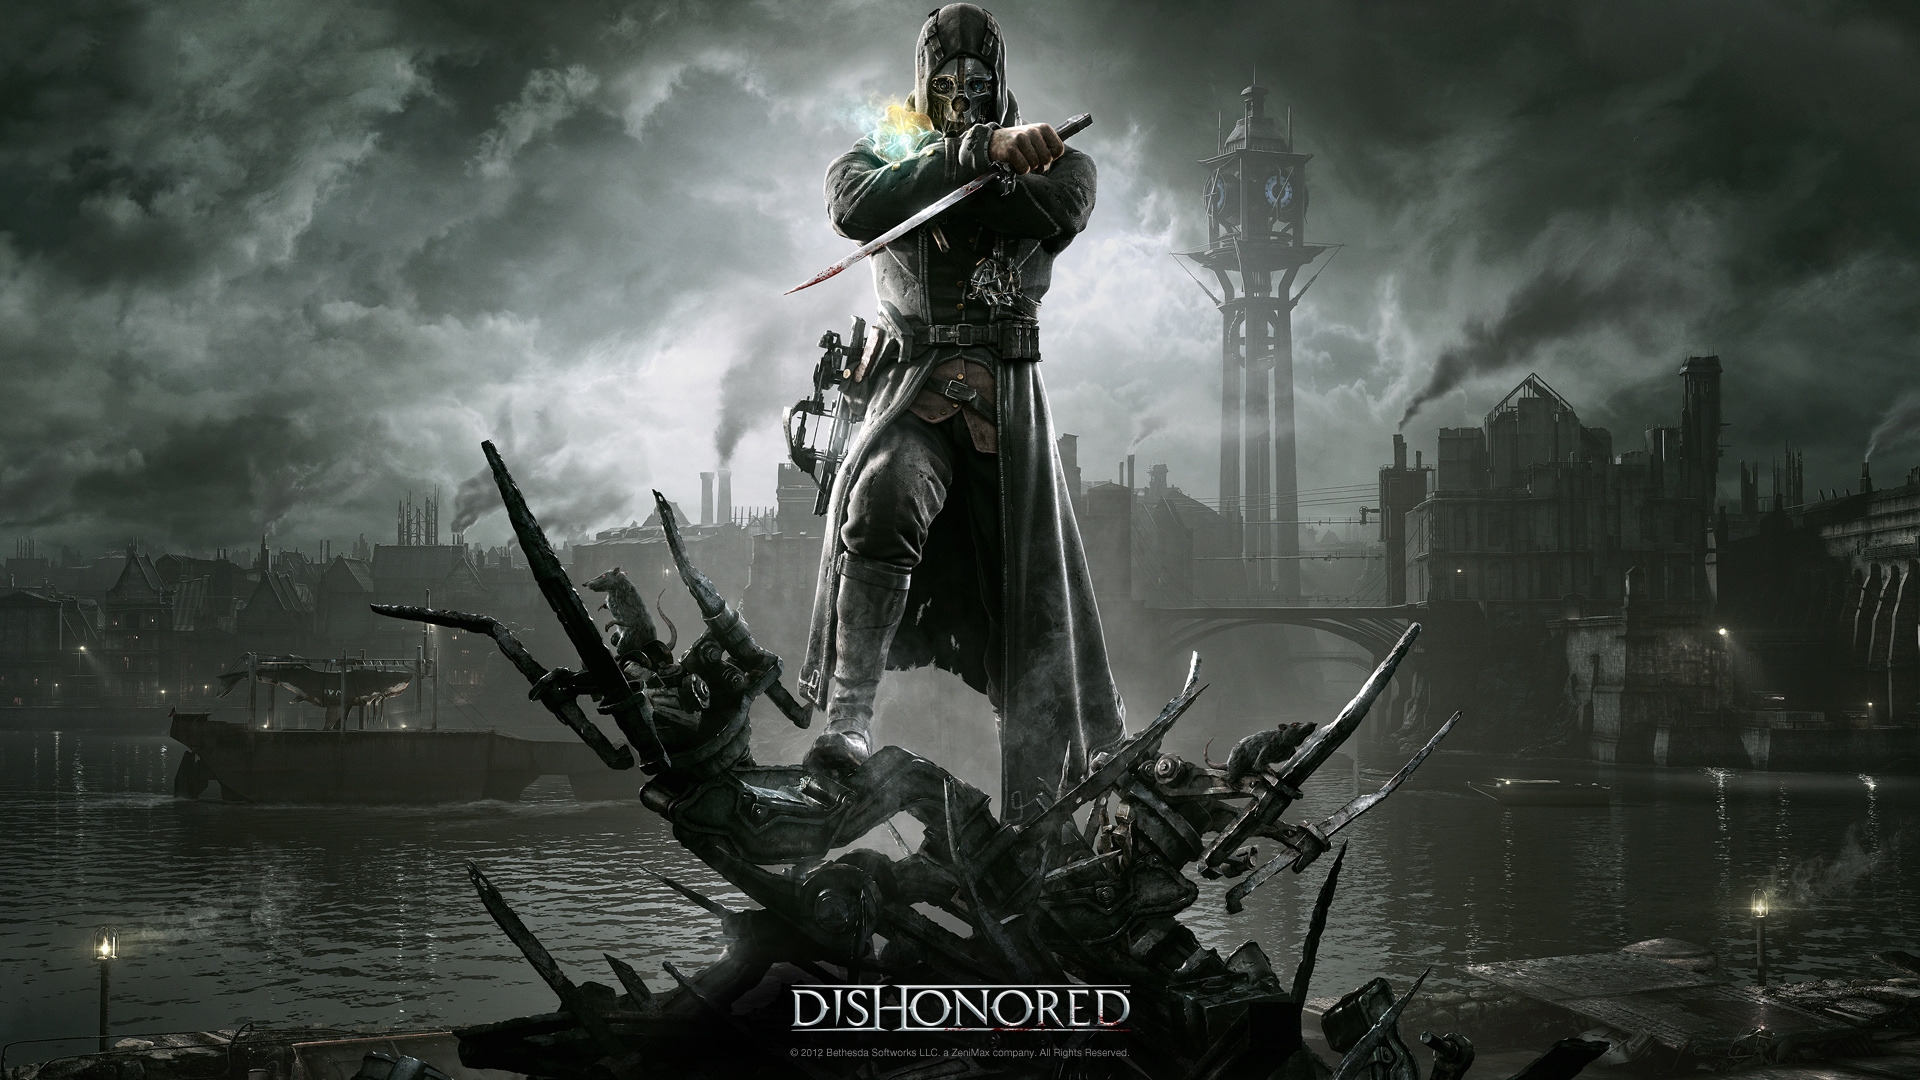 Dishonored 2012 for 1920 x 1080 HDTV 1080p resolution